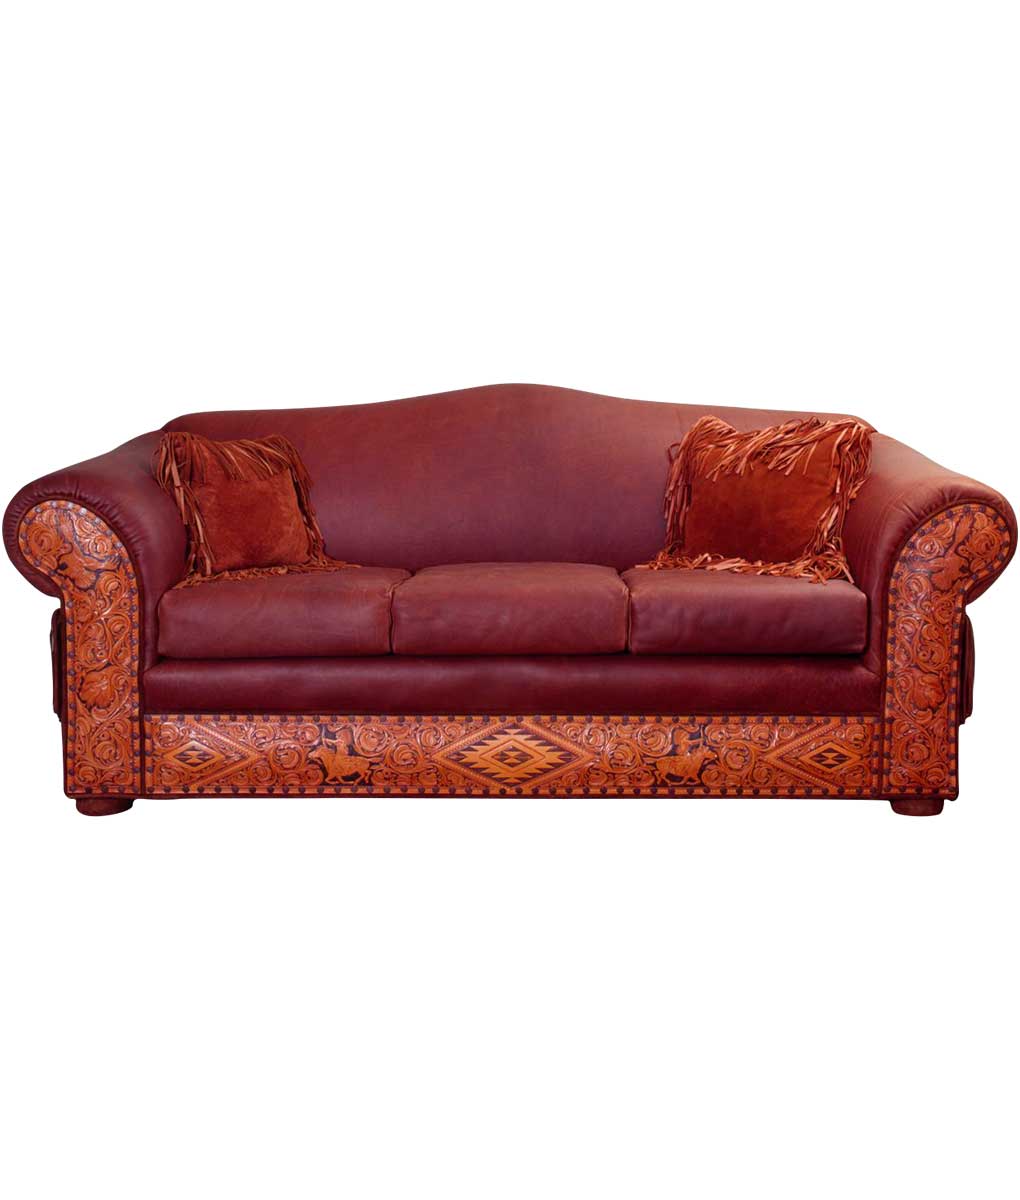 Hand Tooled Leather Sofa Elegant, Rustic Leather Couches